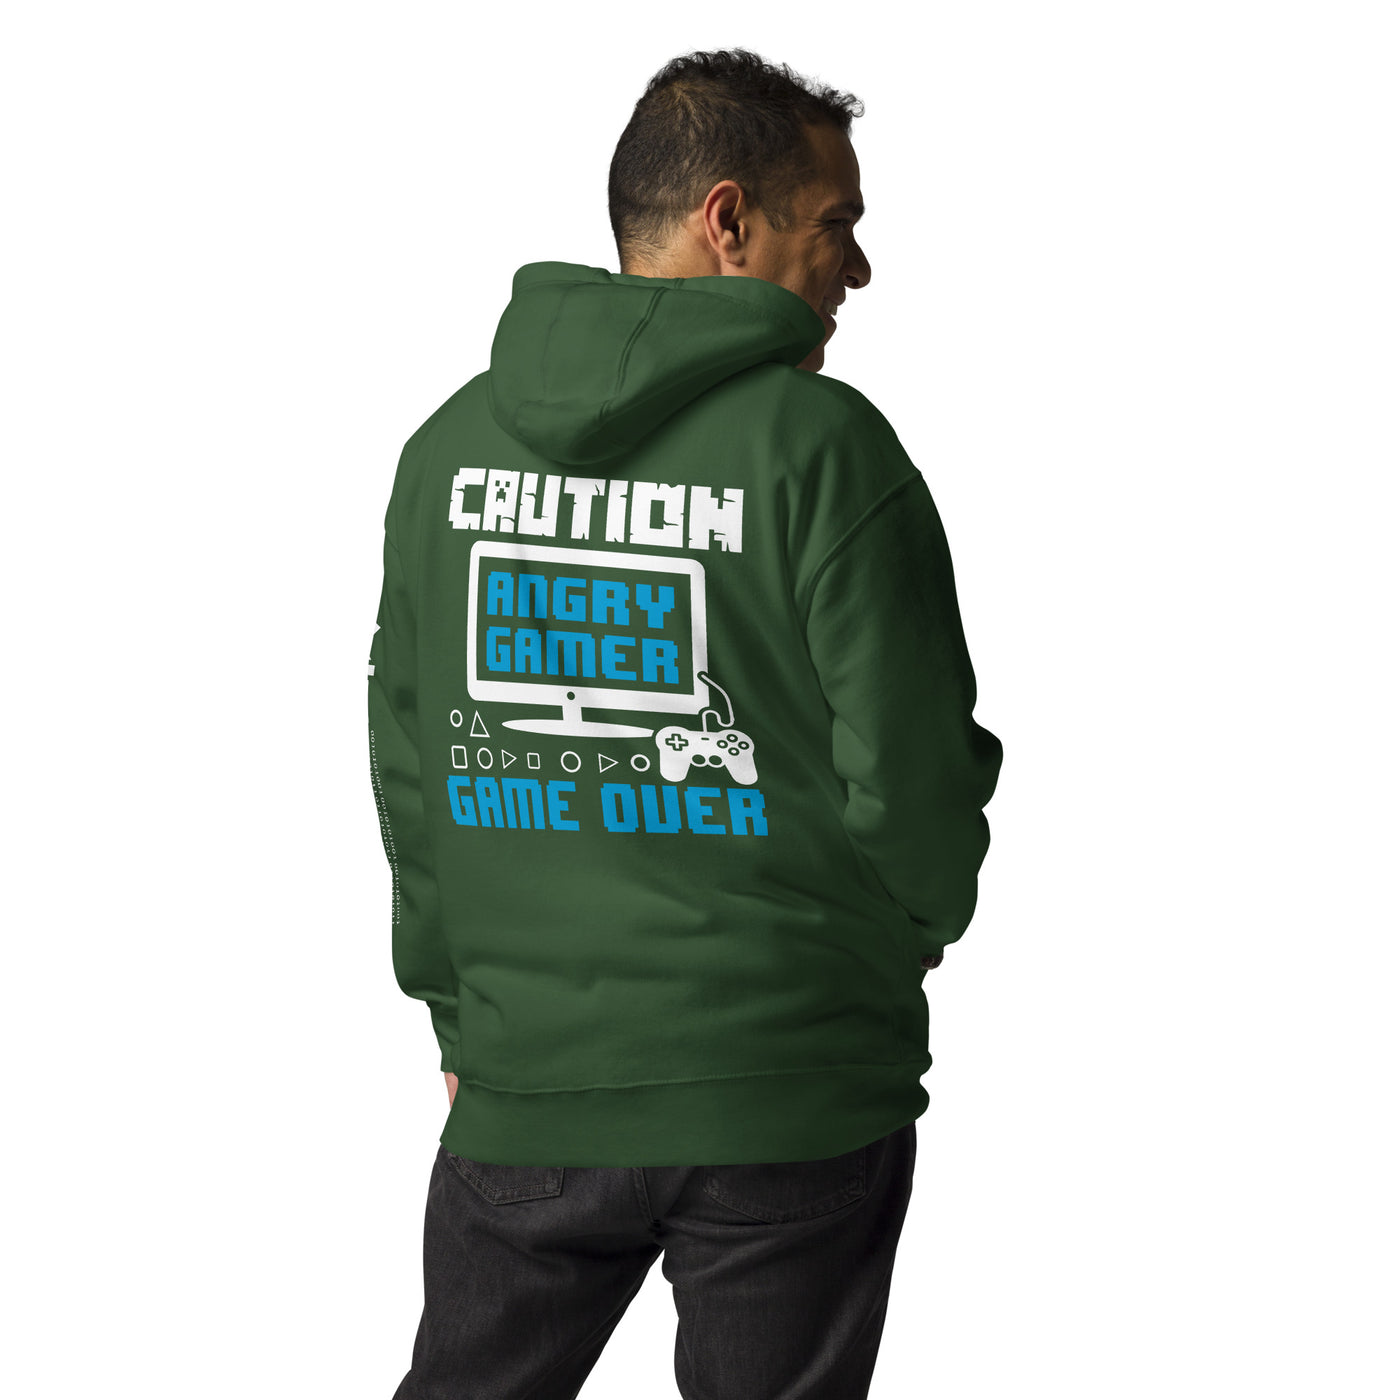 Caution! Angry Gamer Unisex Hoodie ( Back Print )